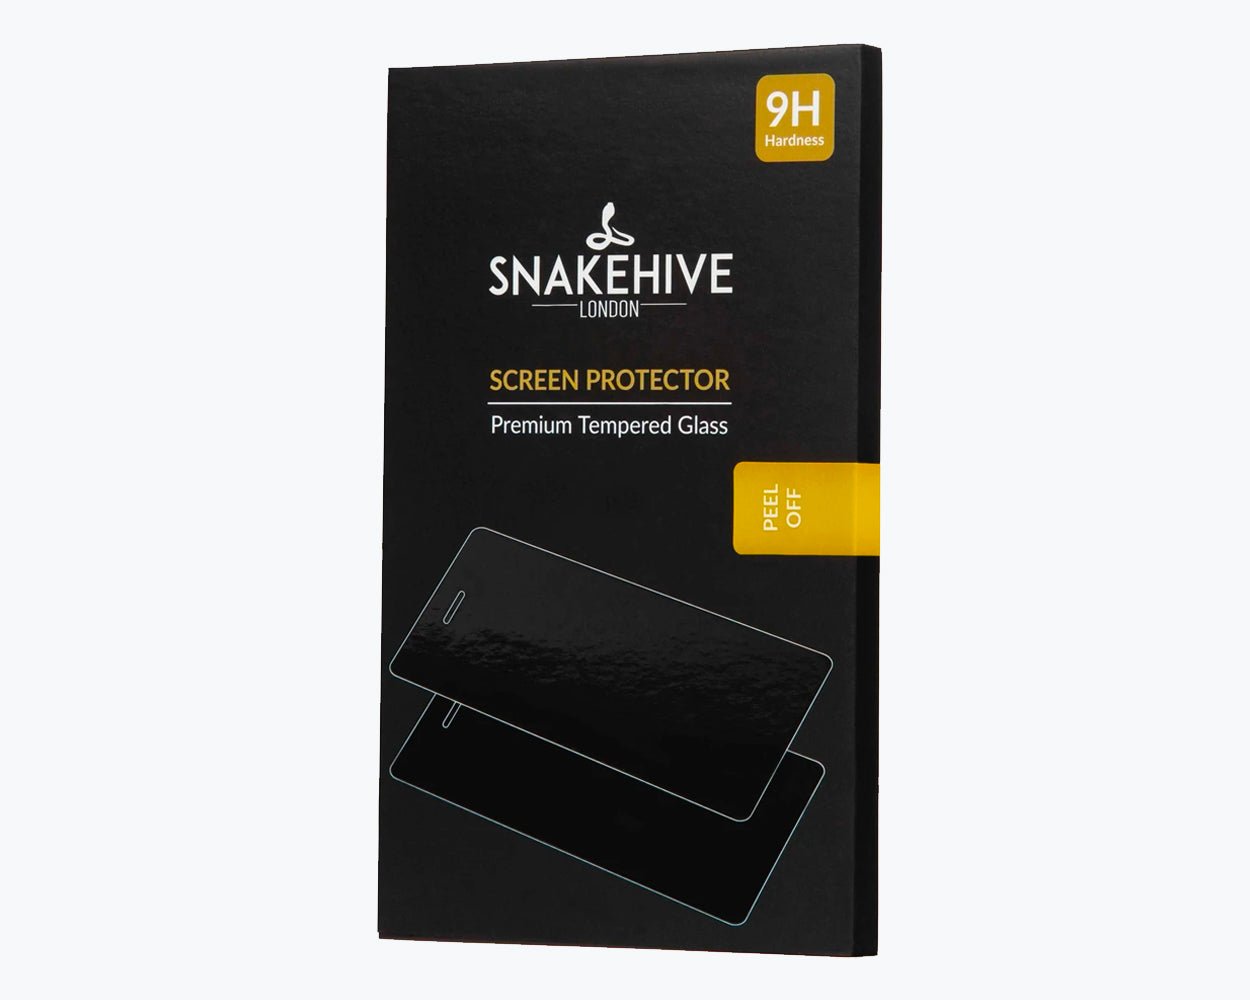 Apple iPhone 6/6S Premium Tempered Glass Screen Protector - Snakehive UK